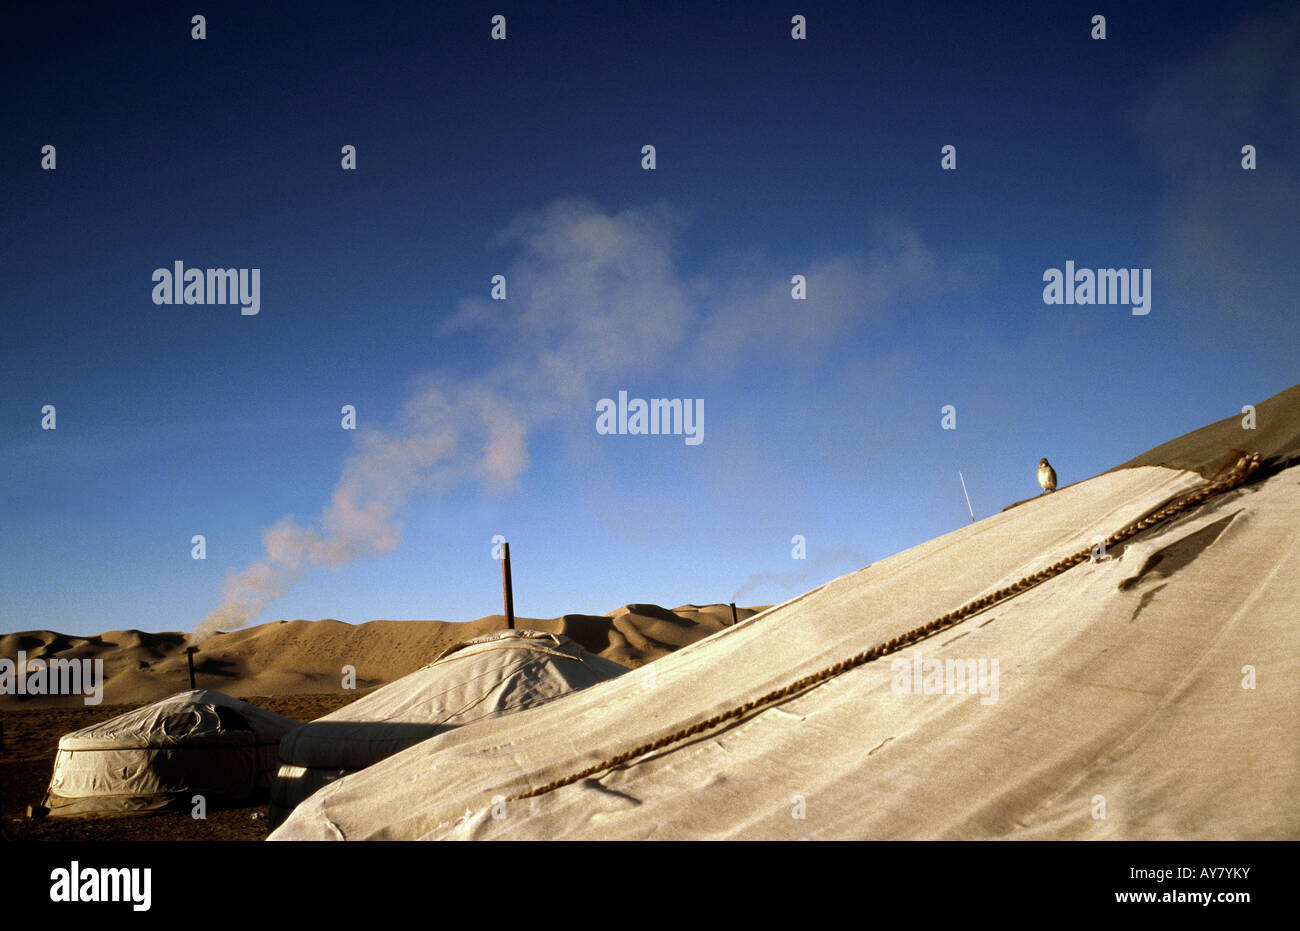 Oct 10, 2006 - Smoke rises from Mongolian ger early in the morning in the Gobi desert of Outer Mongolia. Stock Photo